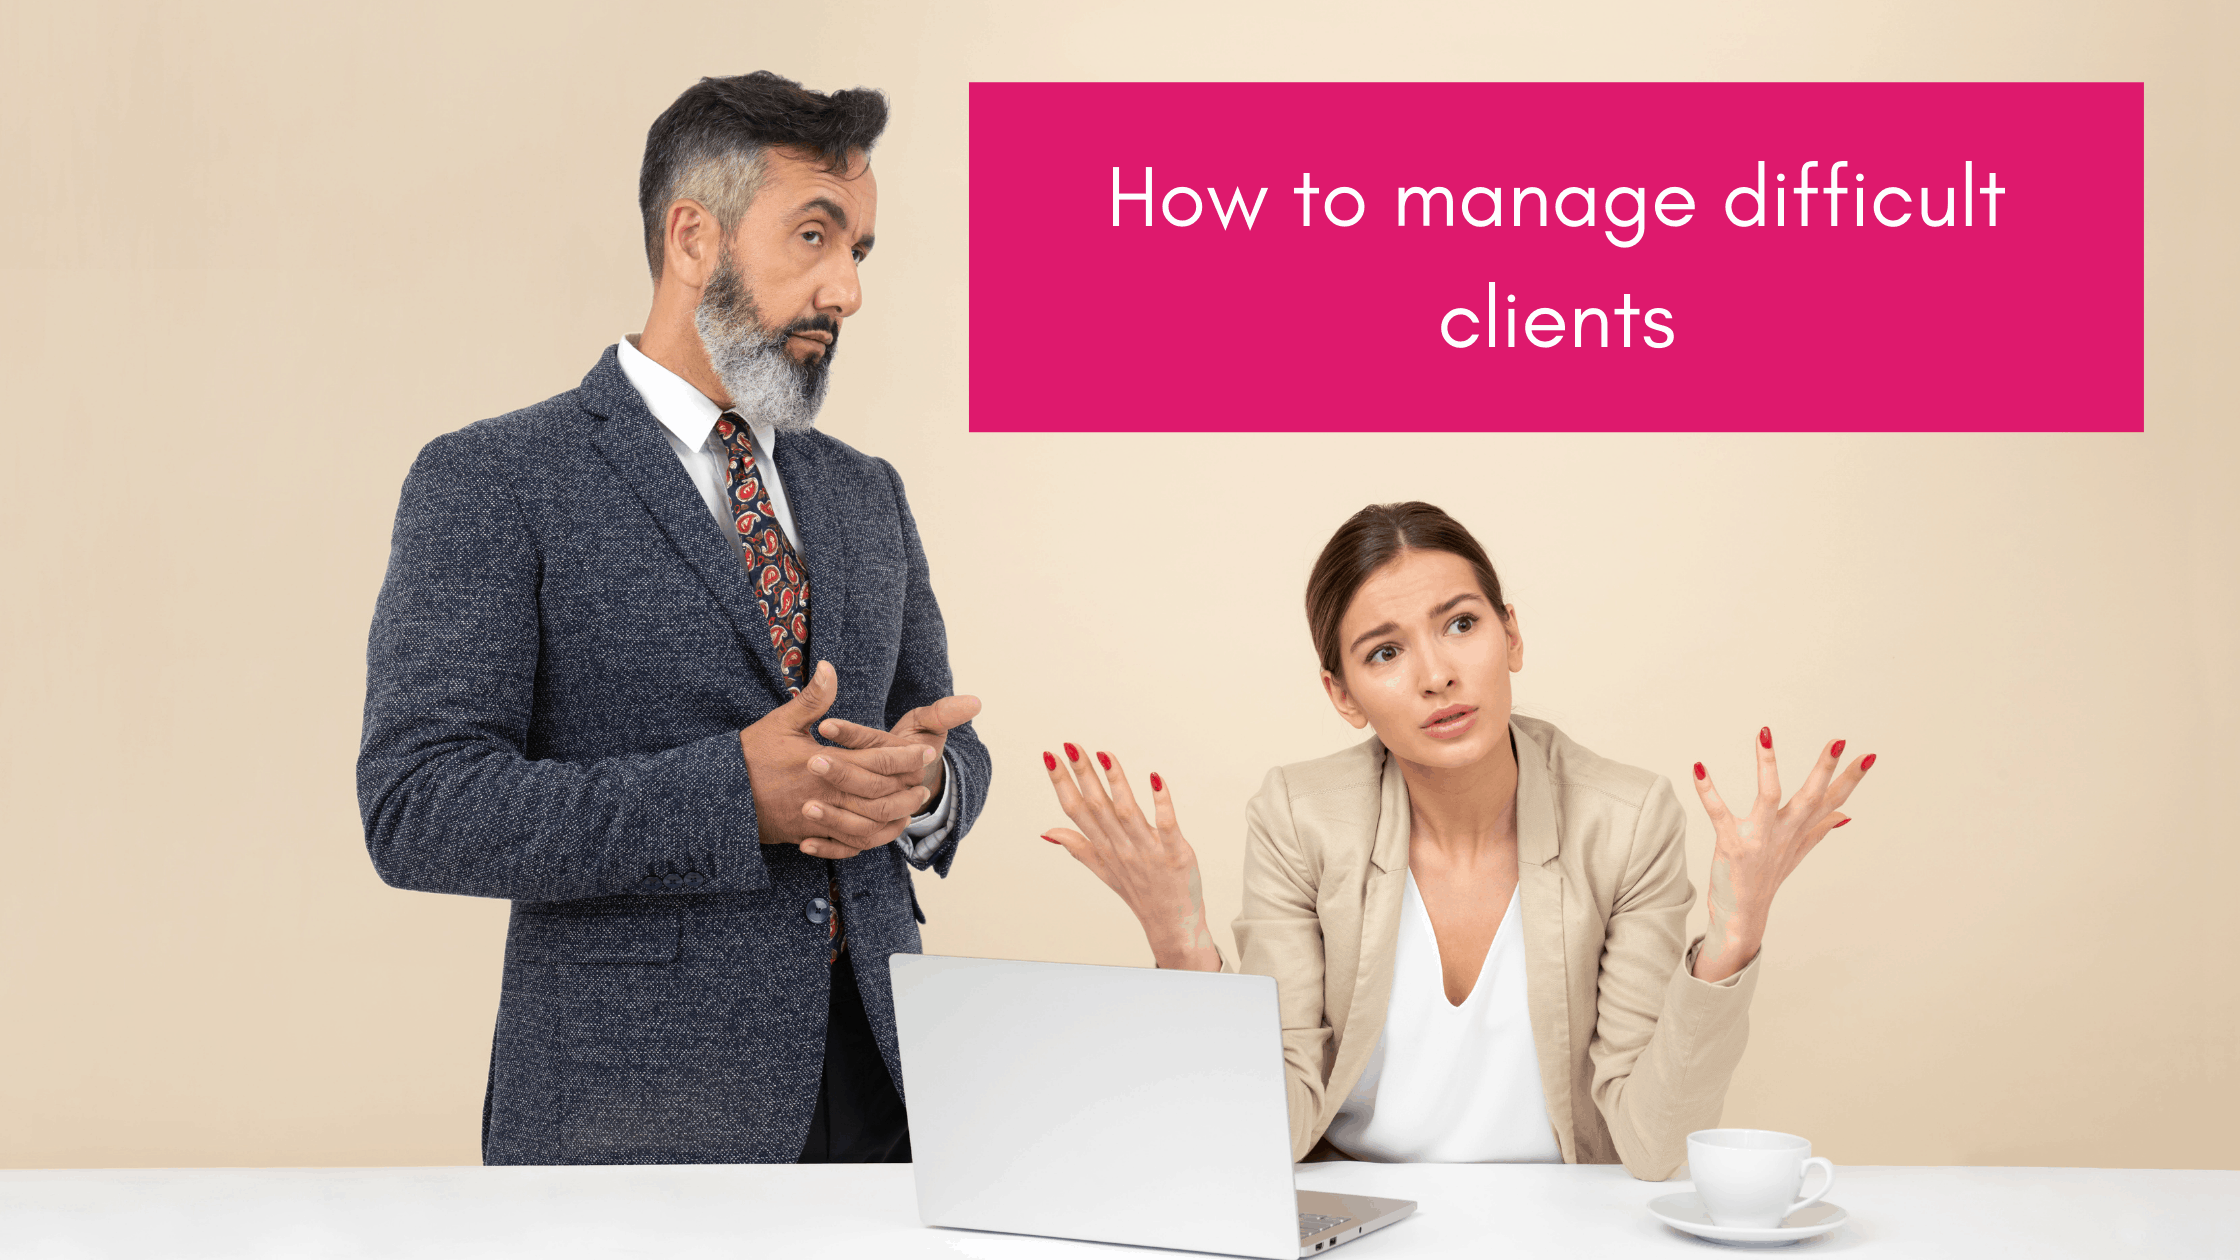 How to manage difficult clients